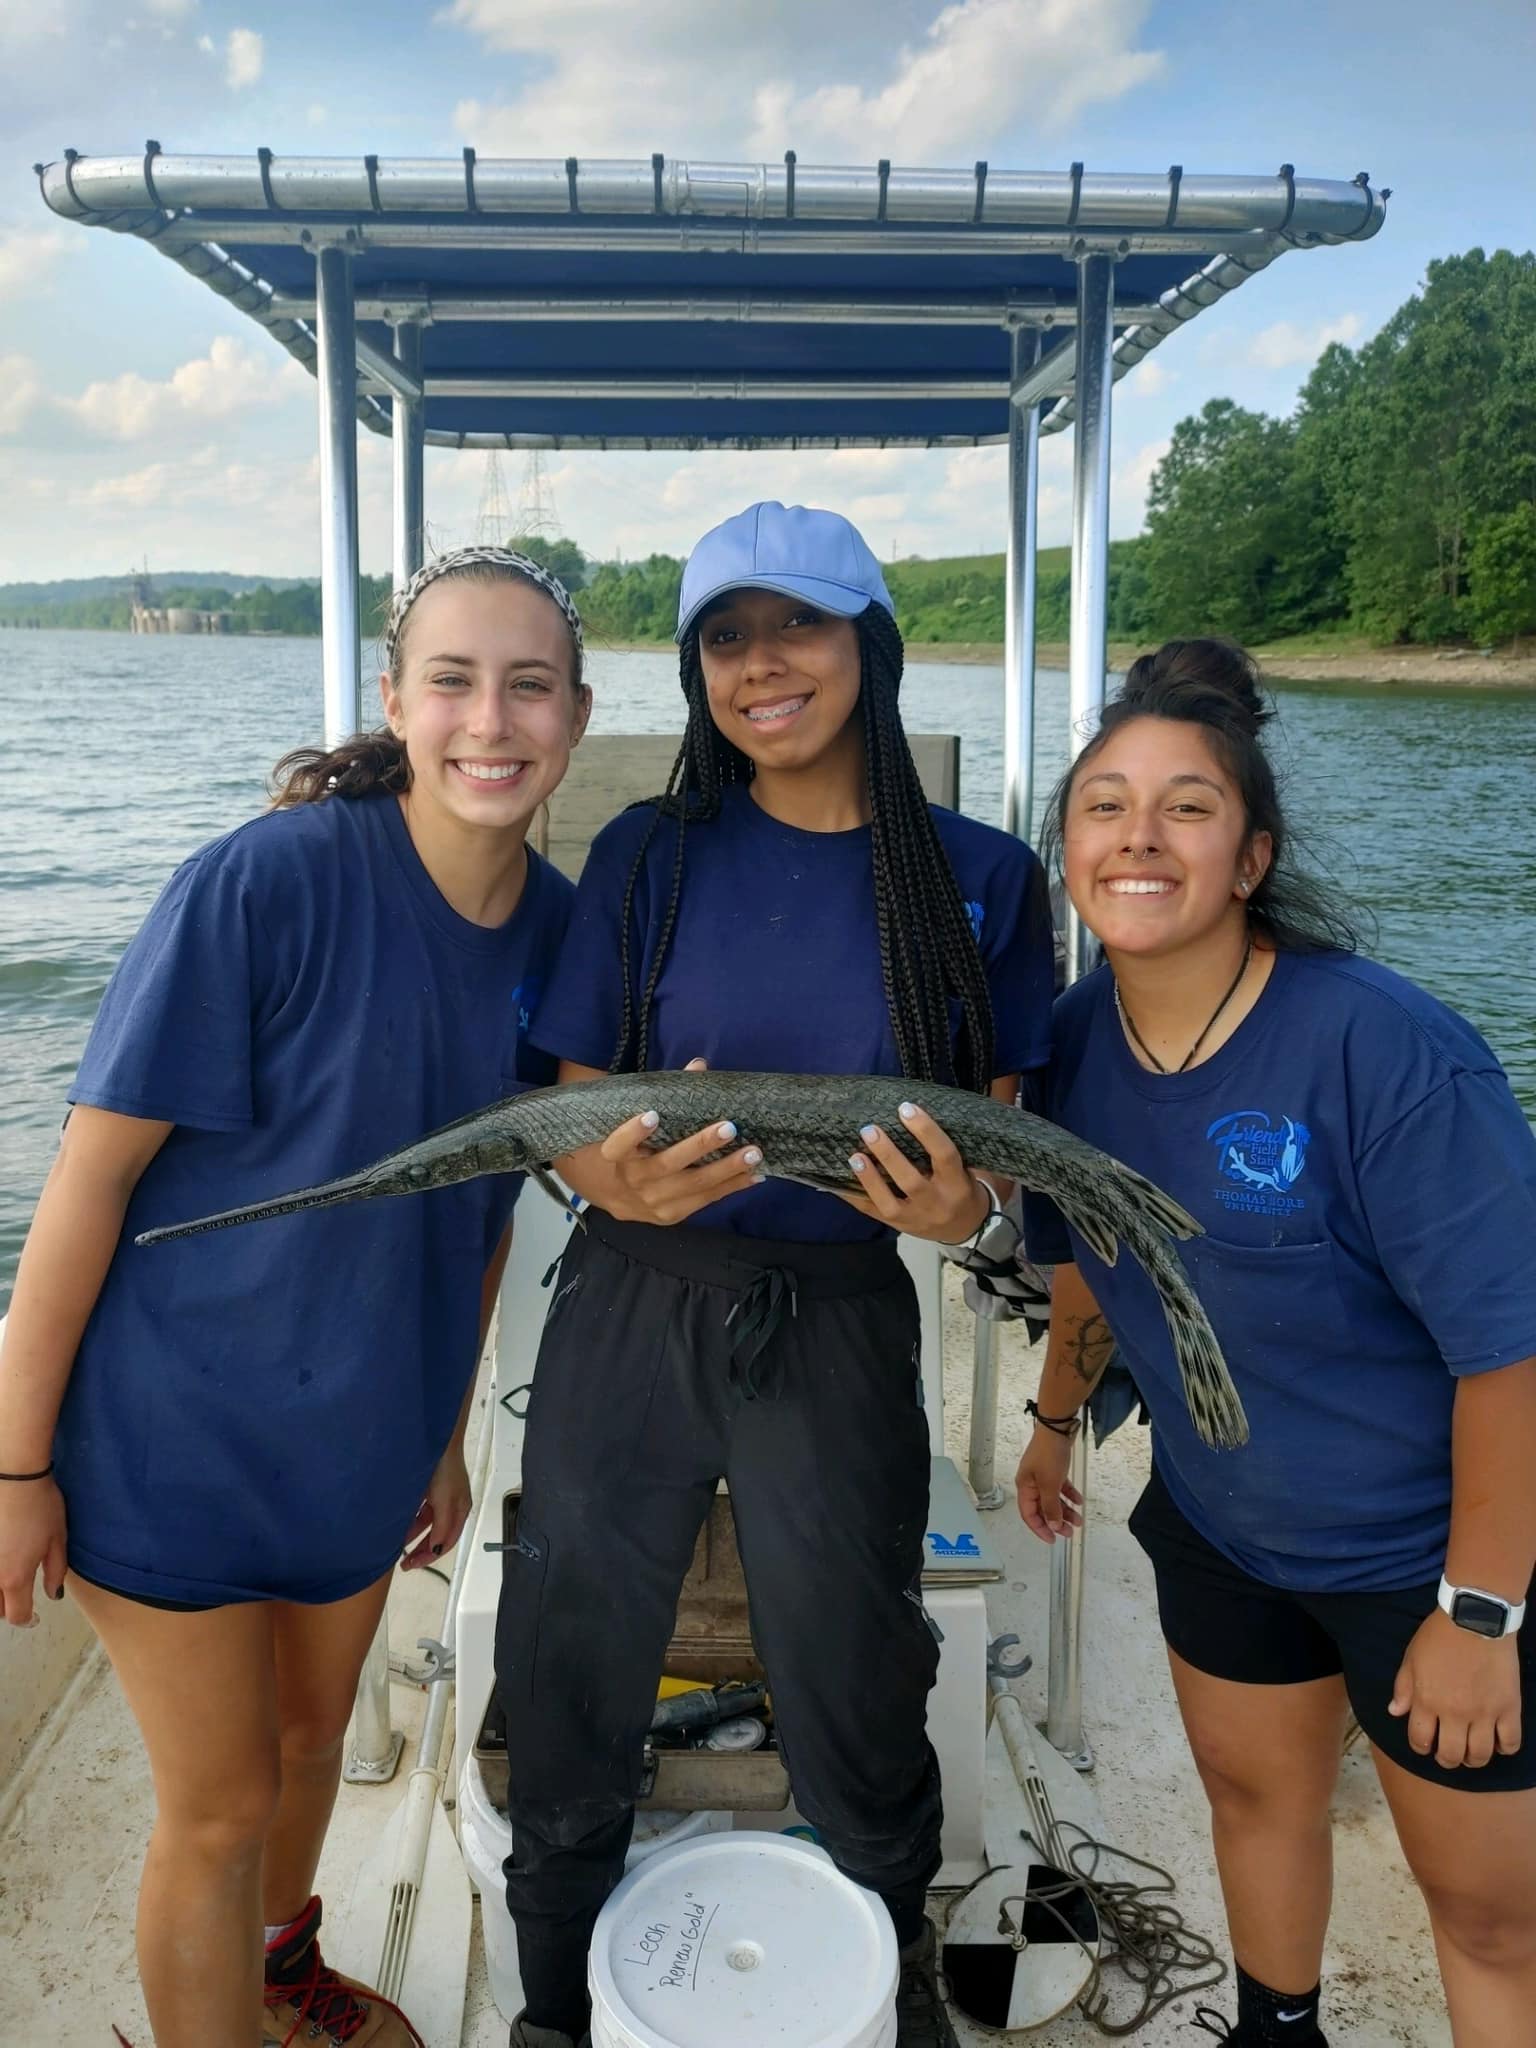 Thomas More U Biology Field station student researchers on a boat on the Ohio River